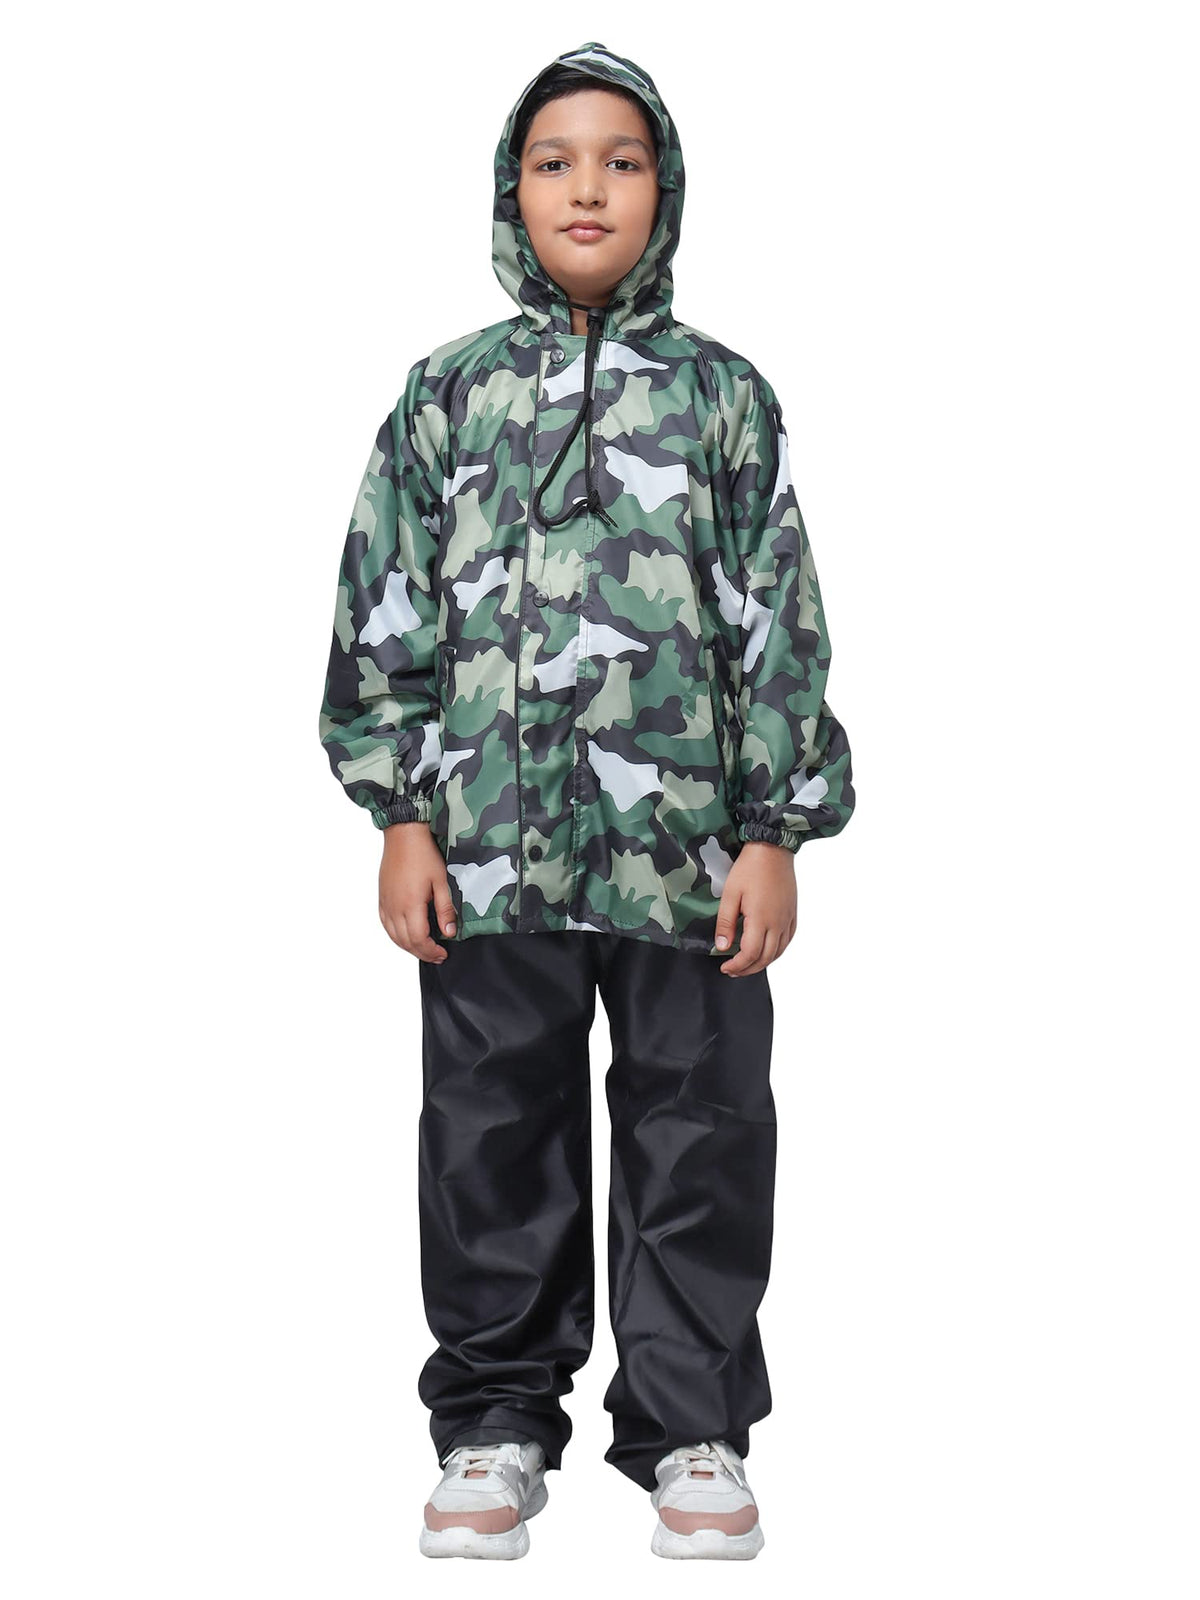 STRAUSS THE CLOWNFISH Comrad Series Kid's Waterproof Nylon Double Coating Reversible Raincoat with Hood and Reflector Logo at Back. Set of Top& Bottom. Printed Pouch Age-5-7 years (Green Camo)